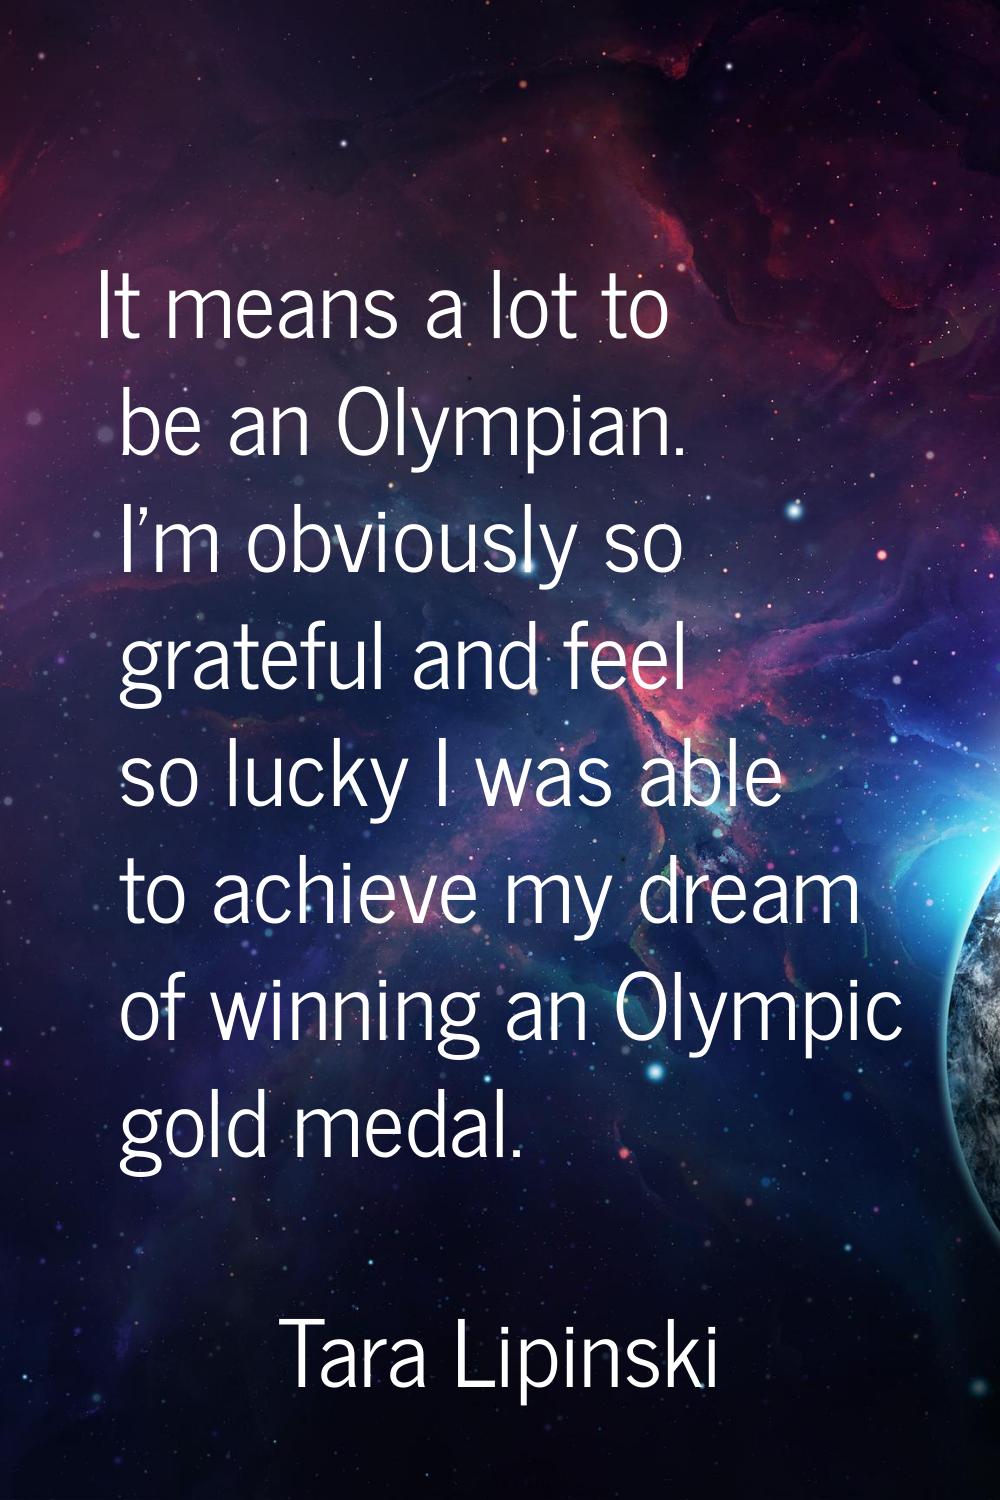 It means a lot to be an Olympian. I'm obviously so grateful and feel so lucky I was able to achieve